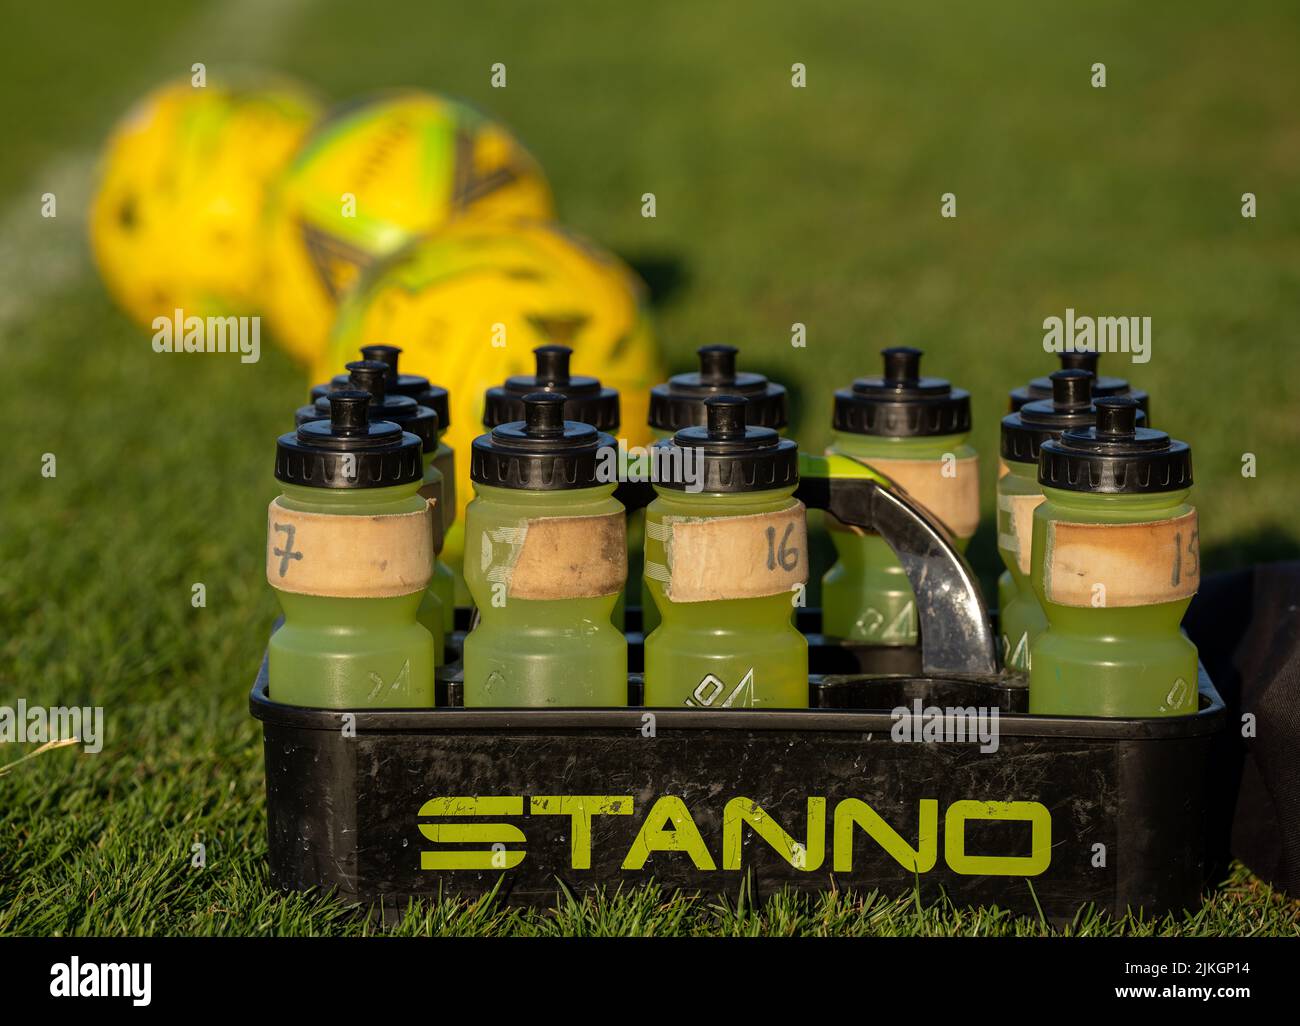 Yellow plastic refillable water bottles with black tops sit in a STANNO carrier on a grass football pitch (soccer). Three yellow balls out of focus Stock Photo